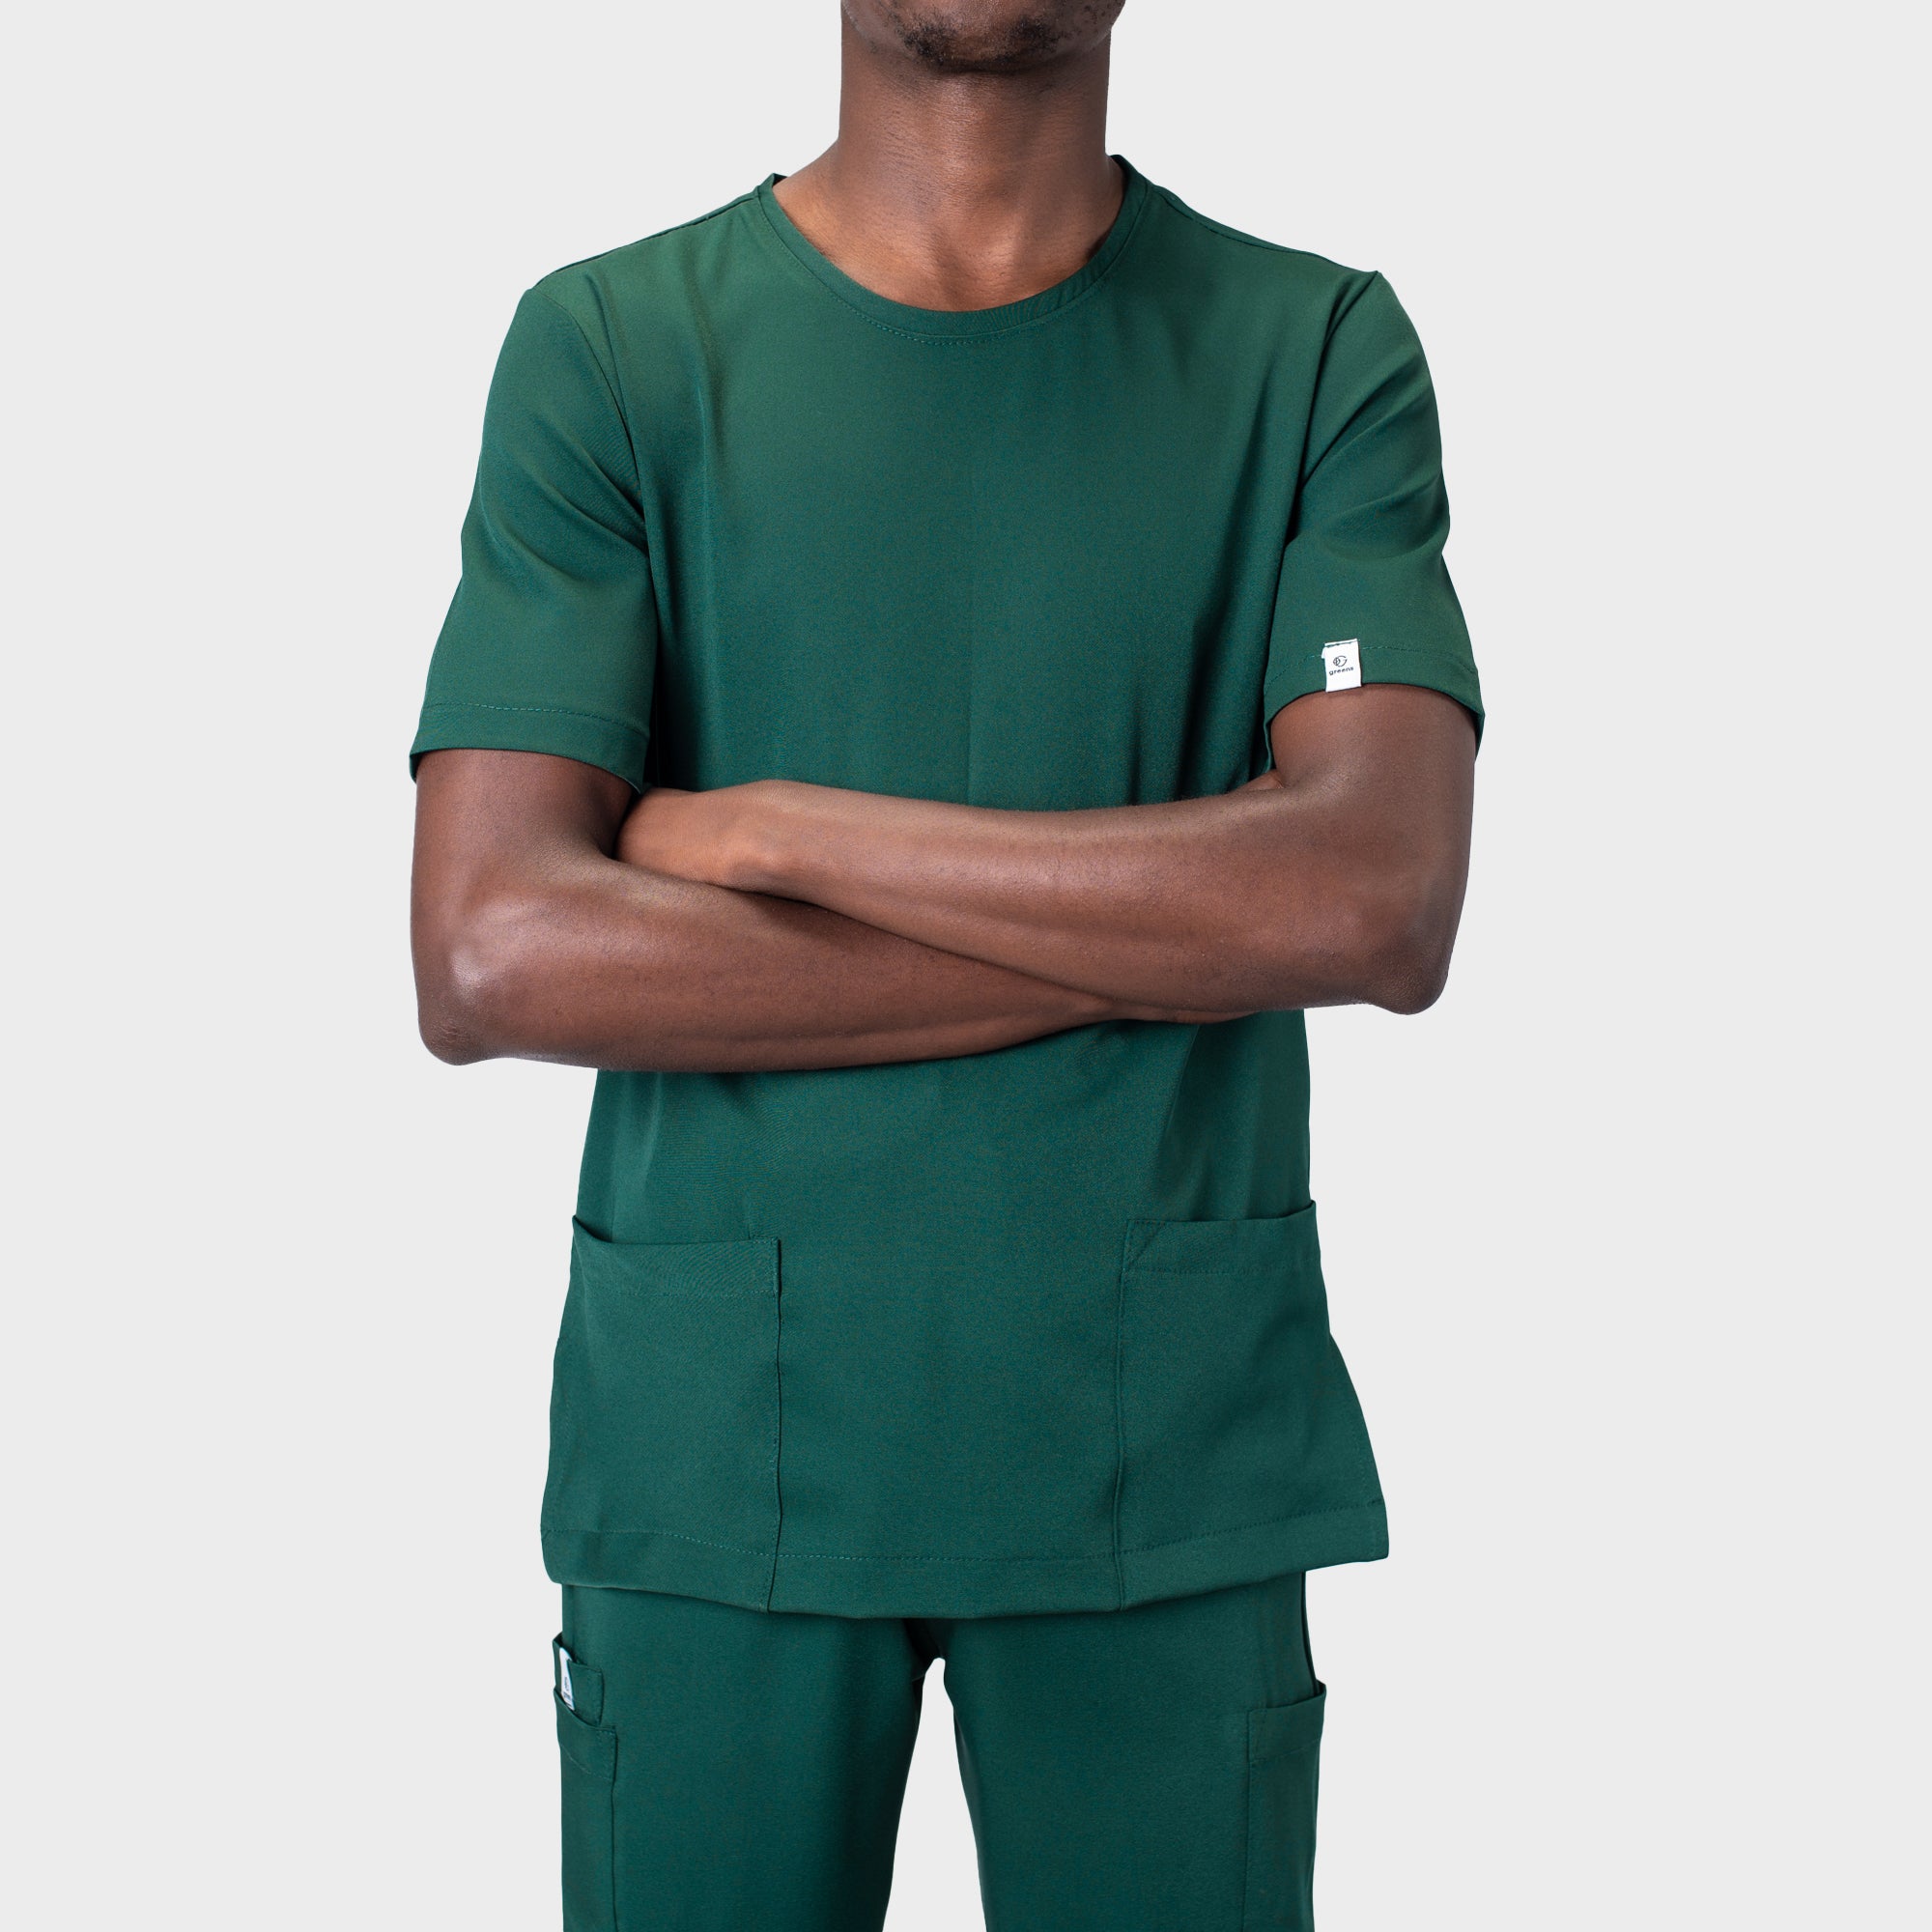 MENS ACTIVE ROUND NECK TOP - Greens Medi Scrubs South Africa - Premium Medical Uniforms & Apparel - Delivery Across SA 